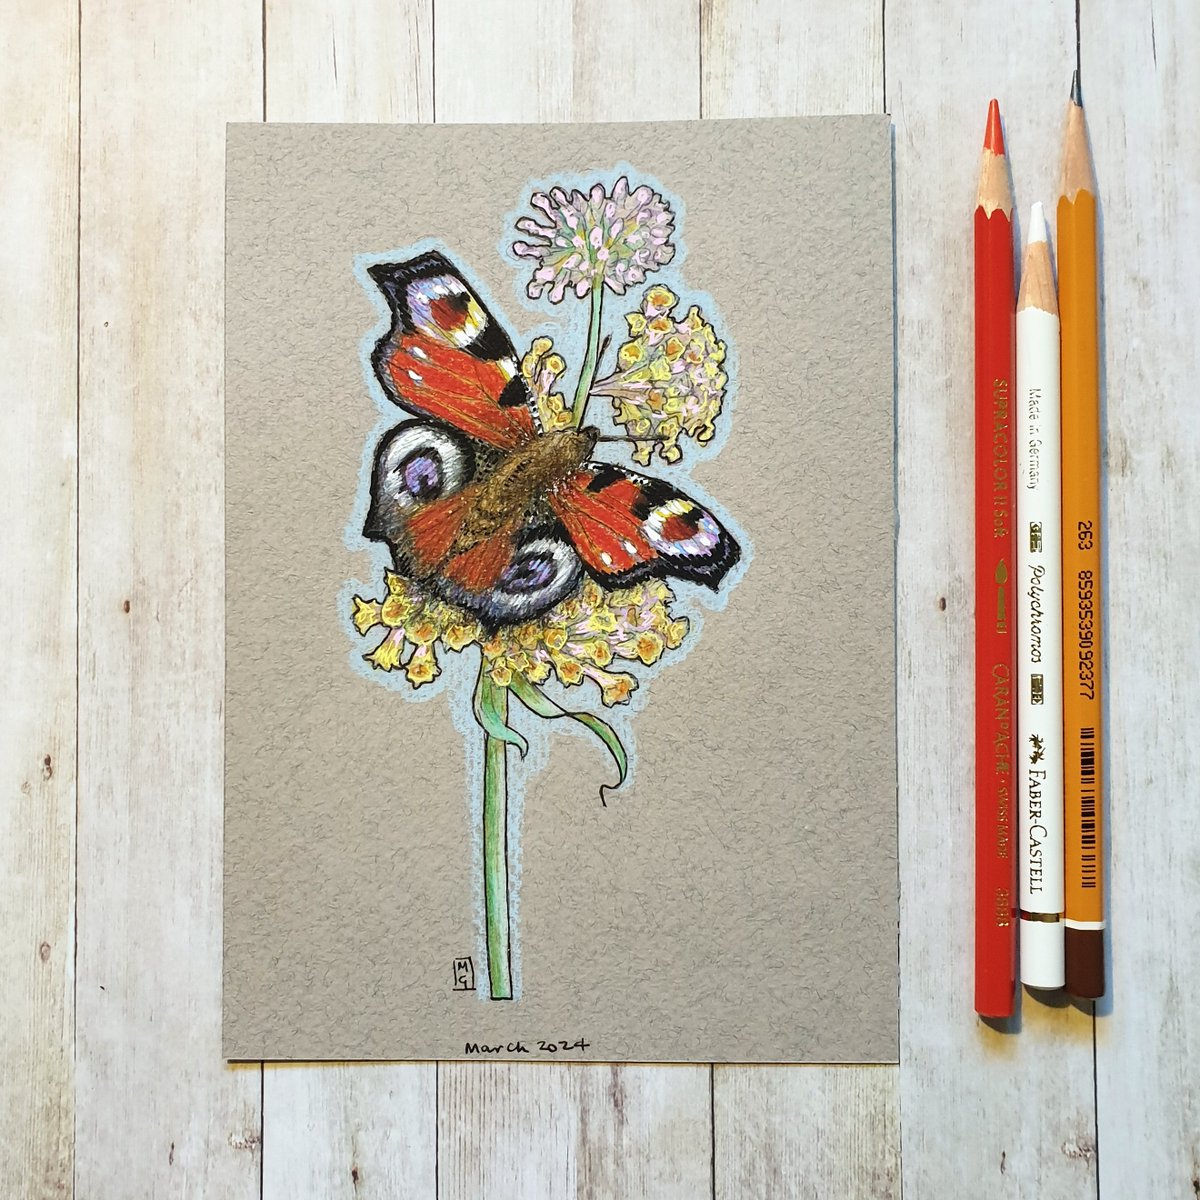 Thanks for the kind words! ★★★★★ 'A beautiful butterfly, light and trusting, a highlight' JK If you are interested in seeing my art, I'd love you to visit my Etsy shop. *shop link in my profile #OriginalArt #drawing #PenAndInk #ColourPencil #insect #insects #InsectArt